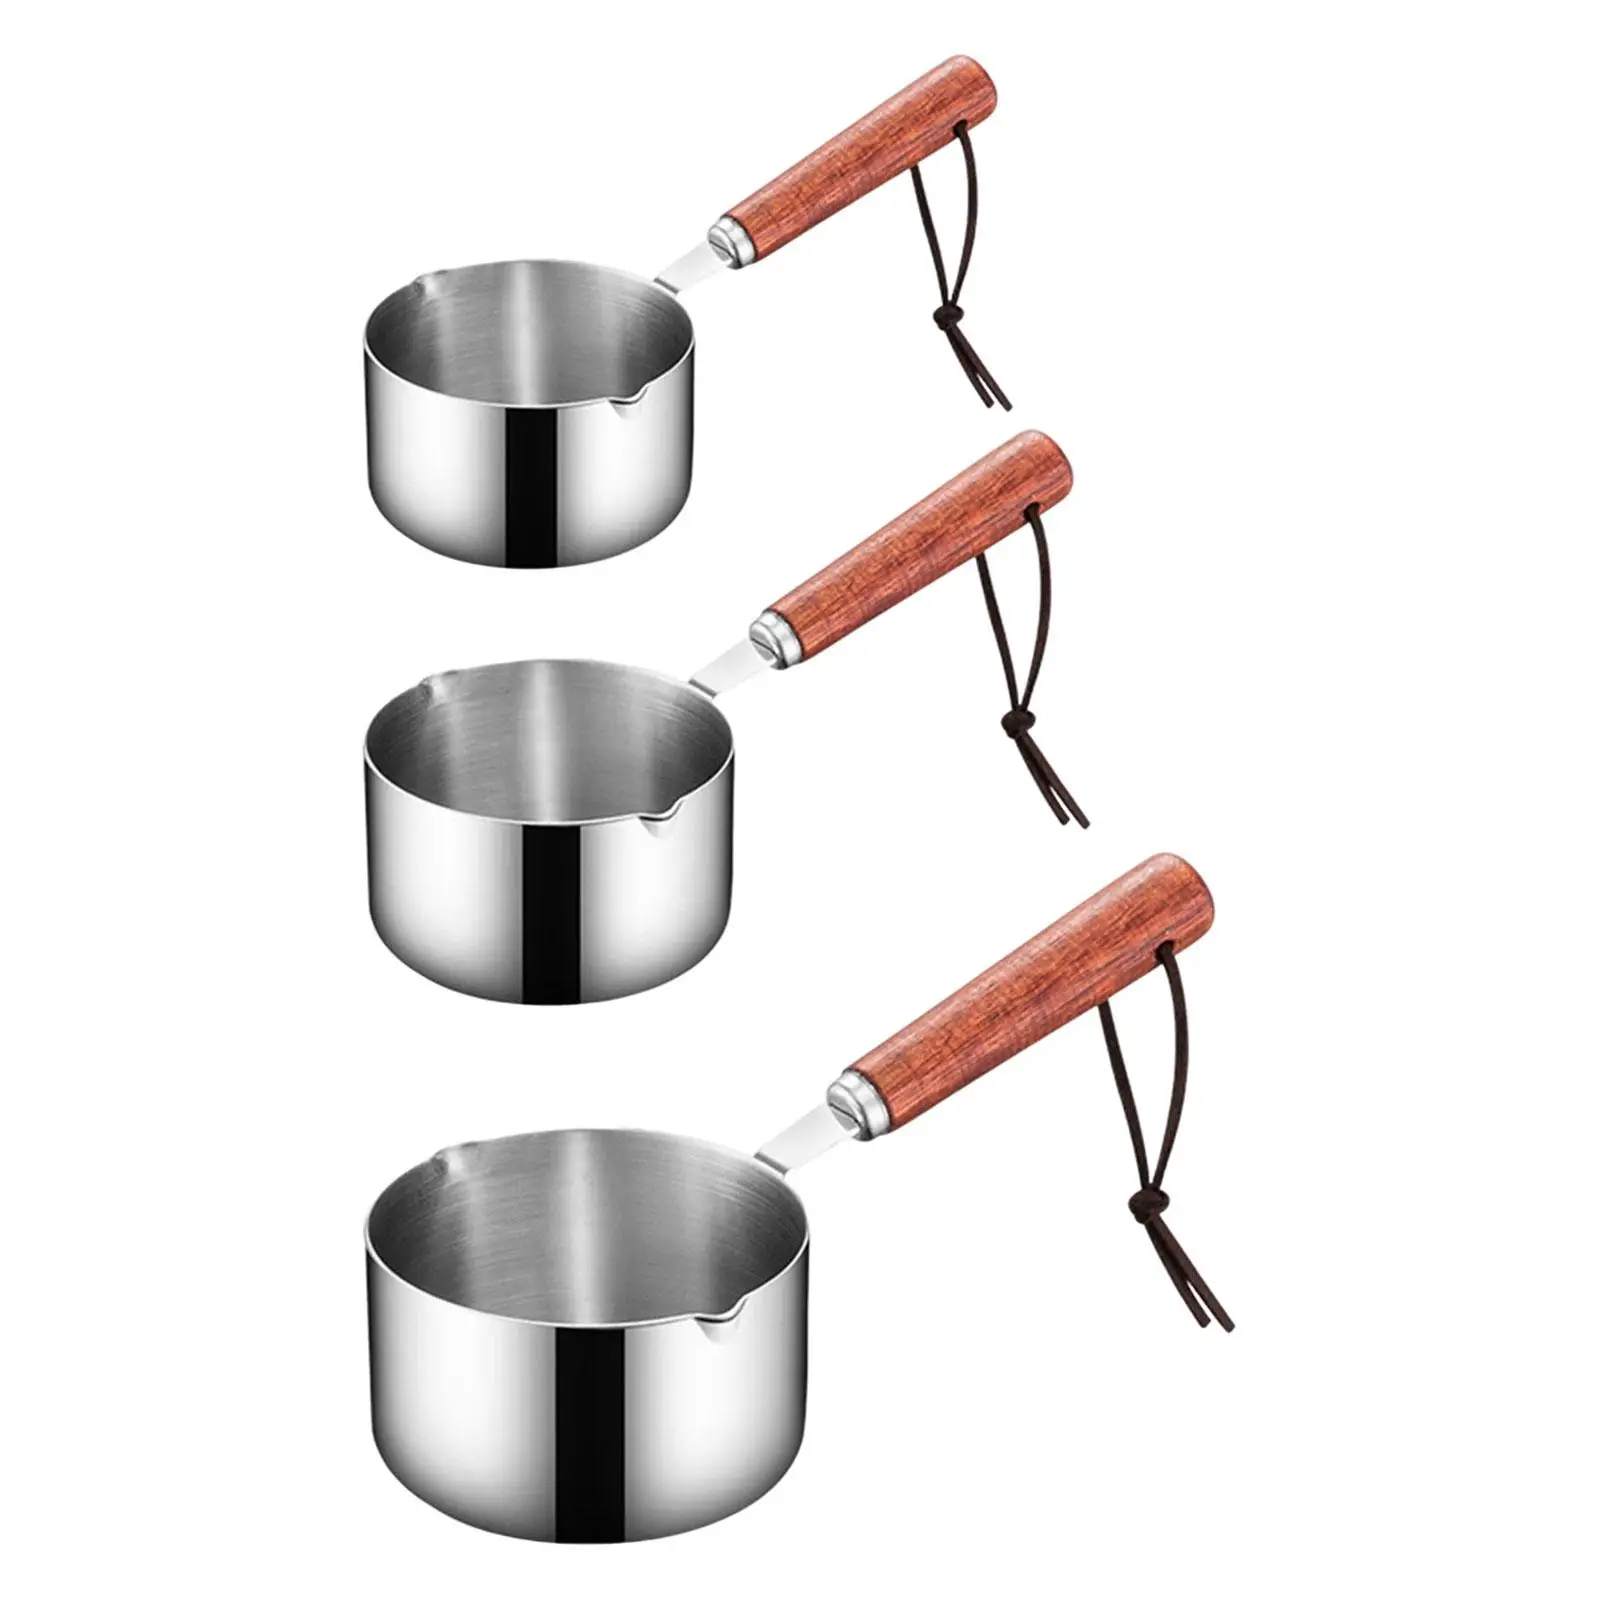 Stainless Steel Mini Soup Pot Easy to Clean Small Cookware Butter Melting Pot Nonstick Small Saucepan for Restaurant